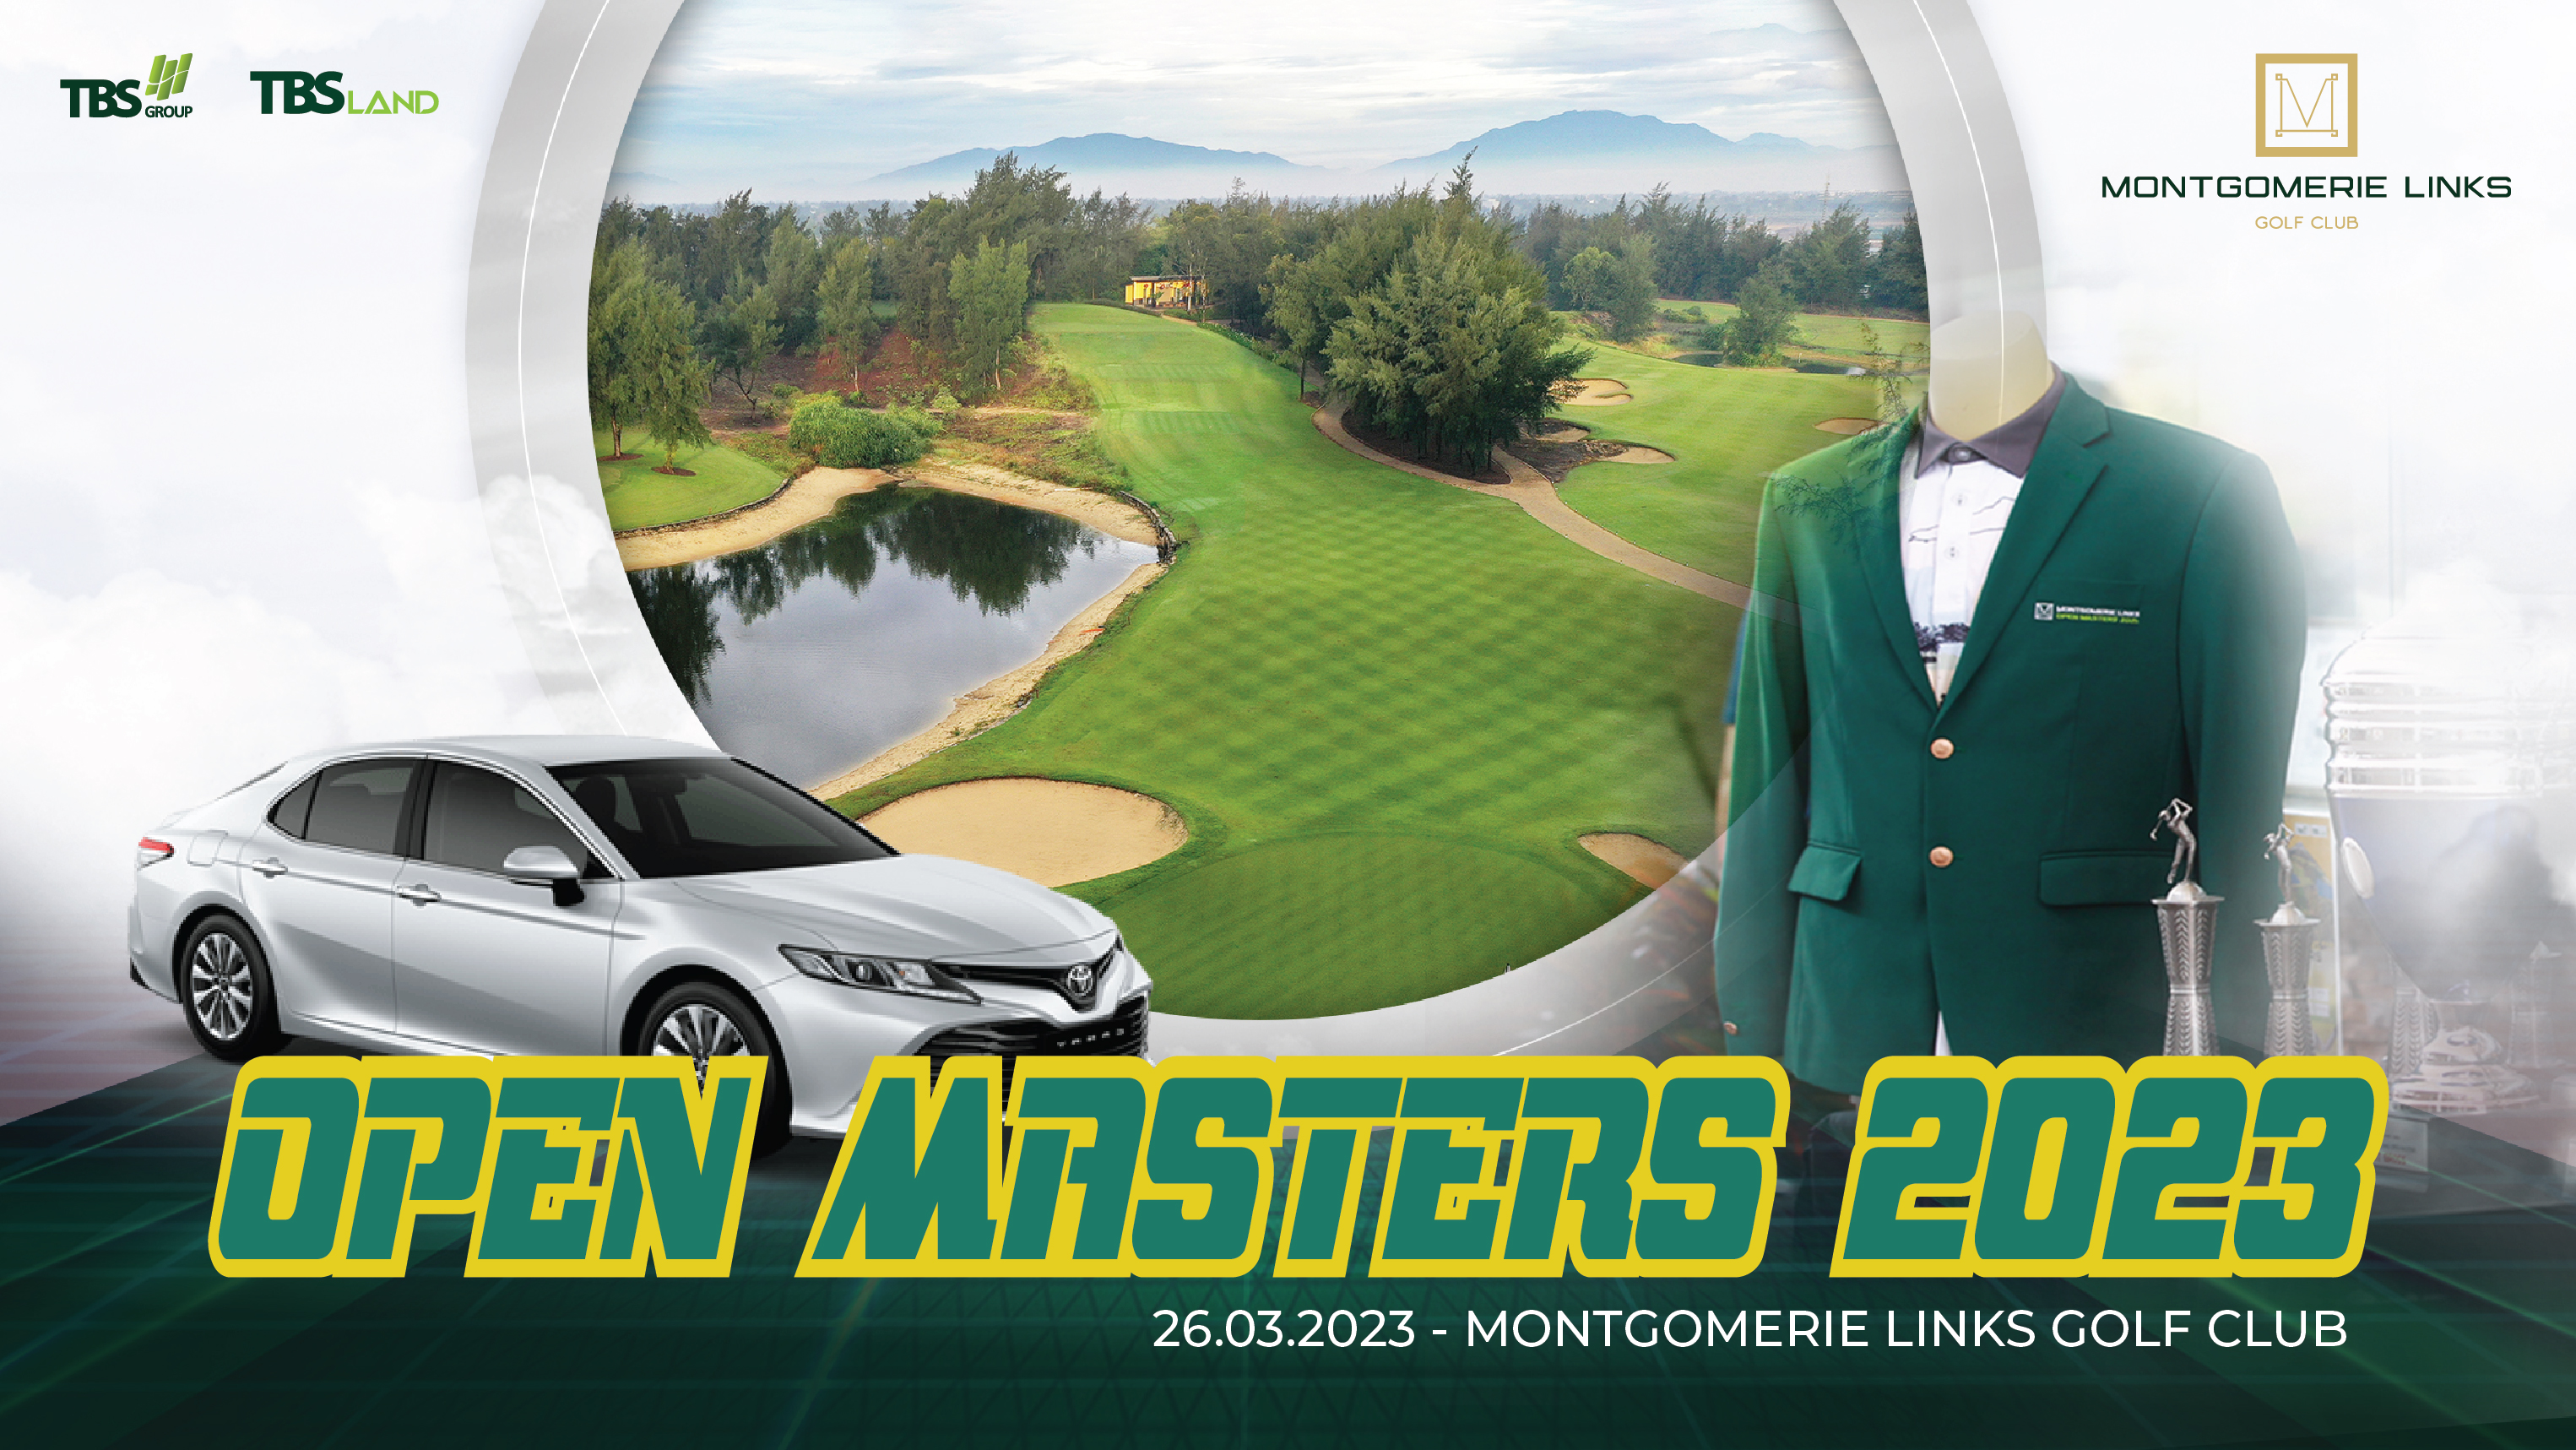 When is the Masters Tournament?